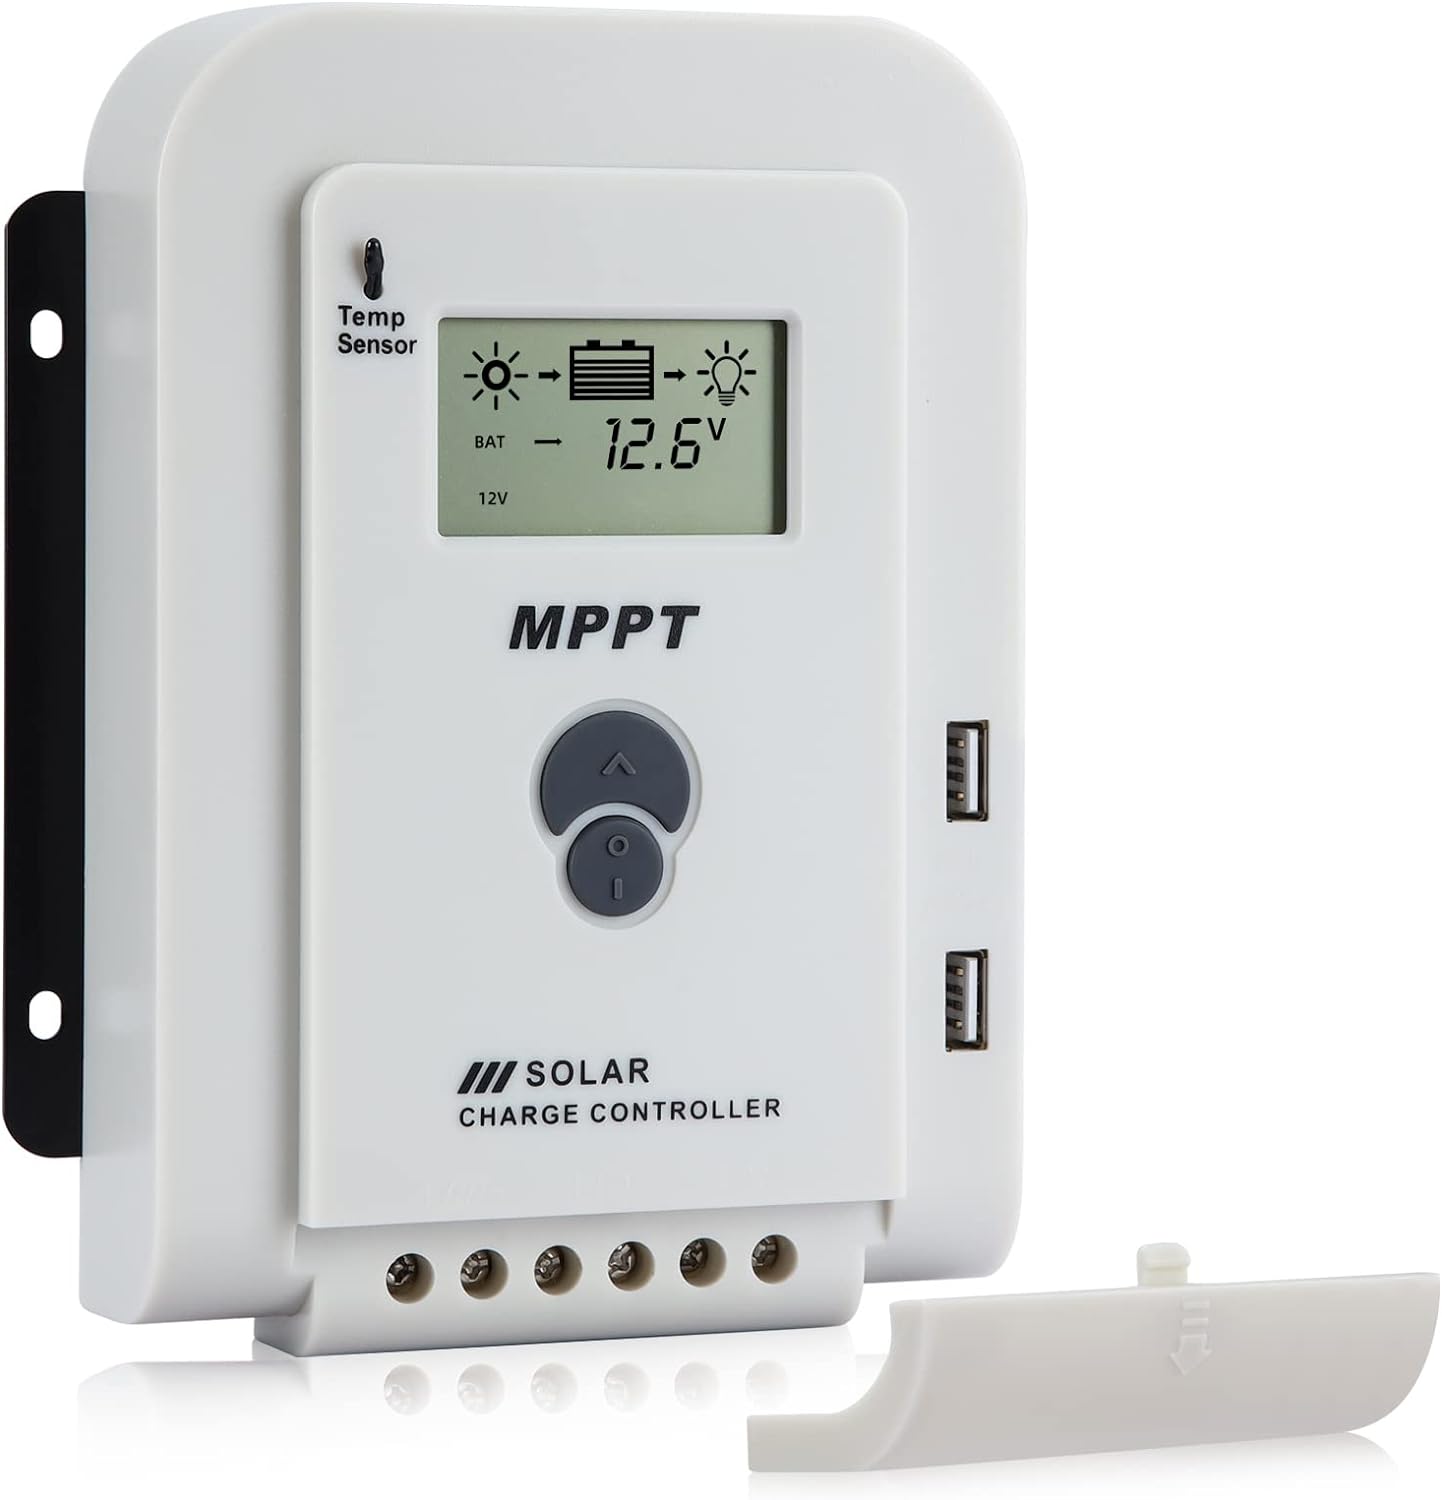 Koolertron 20A MPPT Solar Charge Controller Review